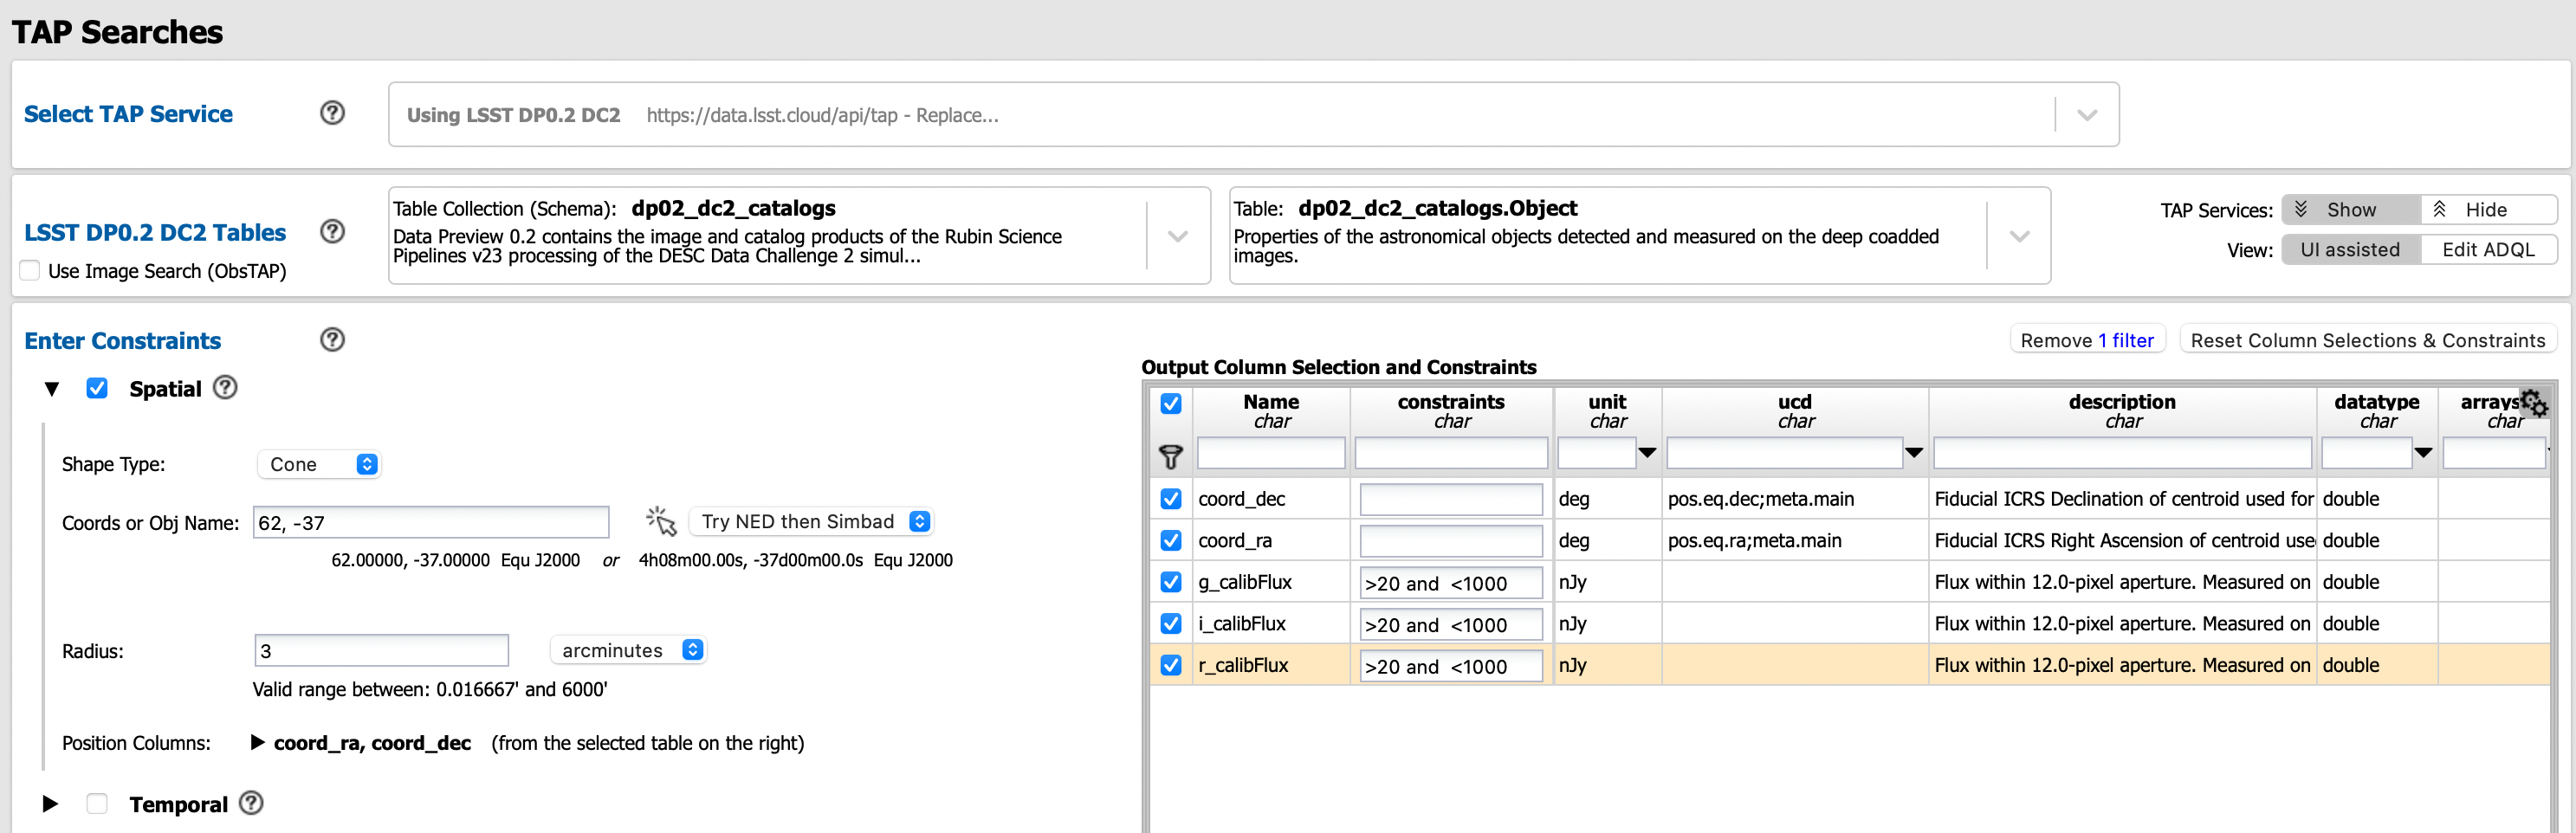 Screenshot of the rubin science platform portal query page.  The user can select the type of service, the table from which to gather data, and select attributes from the table and put constraints on those attributes.  The user may also select the number of data entries to return.